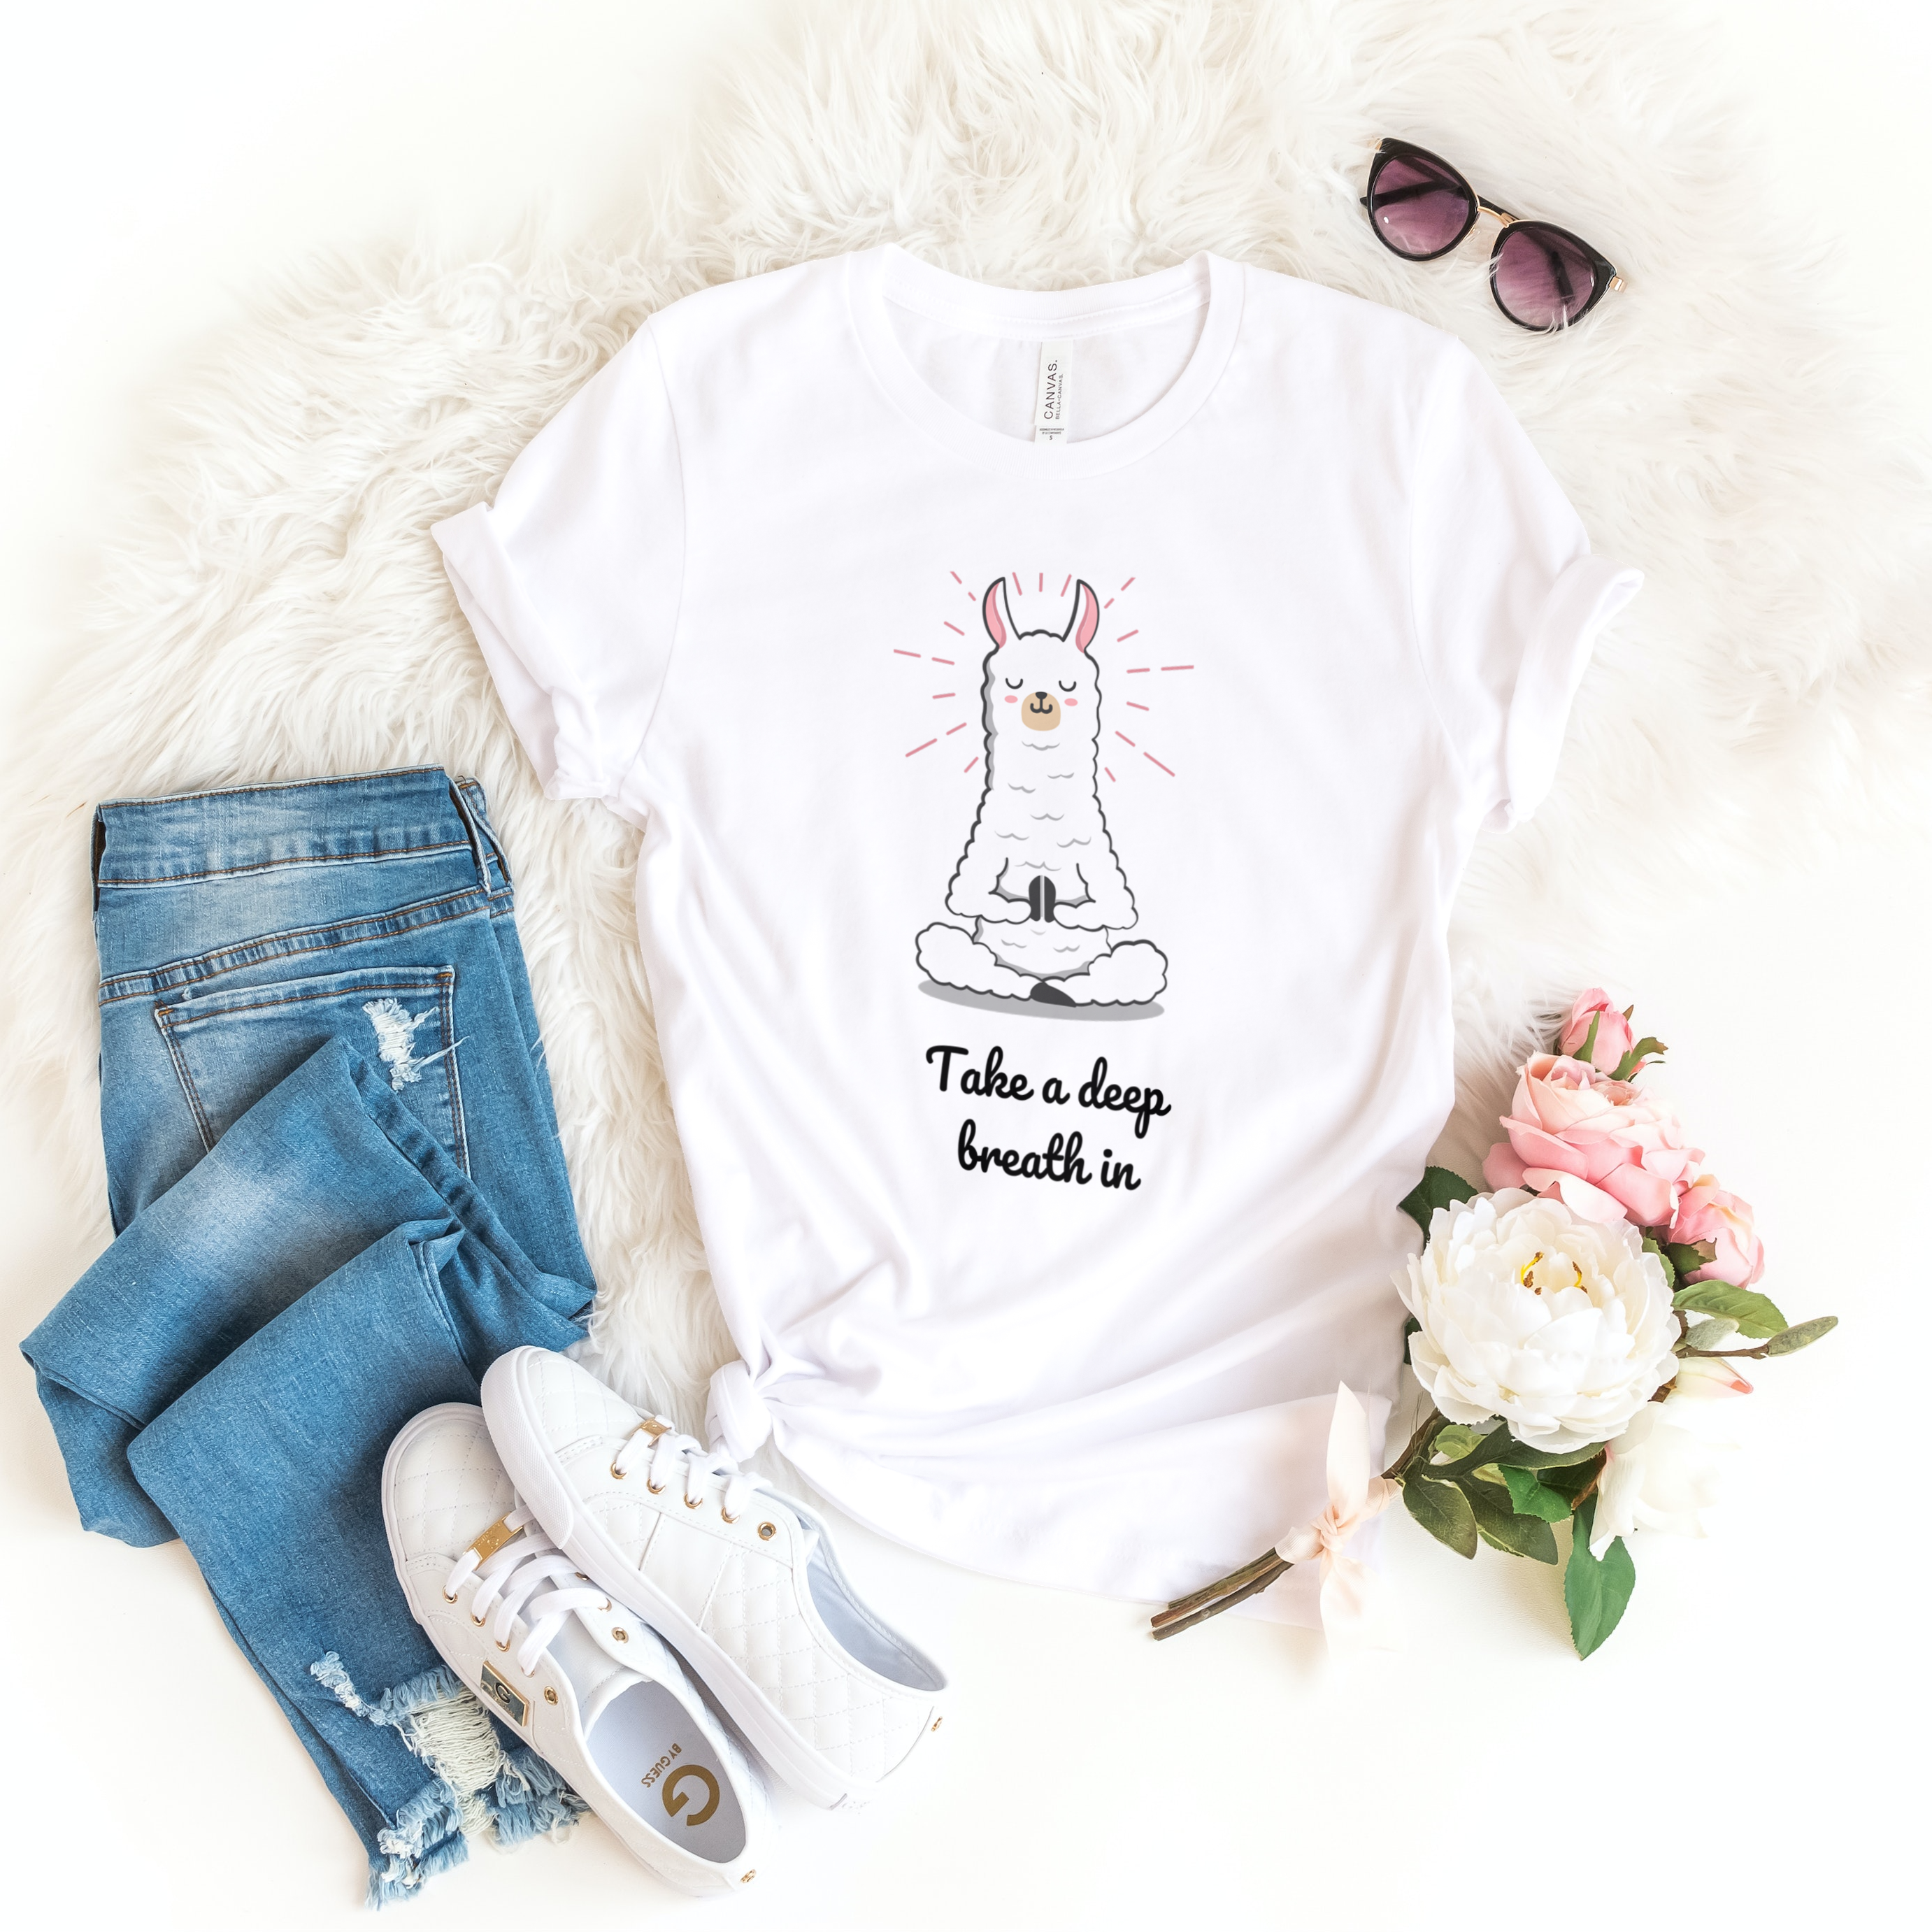 Story of Awakening Lifestyle Community Spirituality Relationships Love Light Meditation Oneness Earth Balance Healing Shop Store Charity Tree Nature Read Write T shirt Tops Tees Clothing Women Horoscope Organic Cotton Take A Deep Breath In Lama Quote